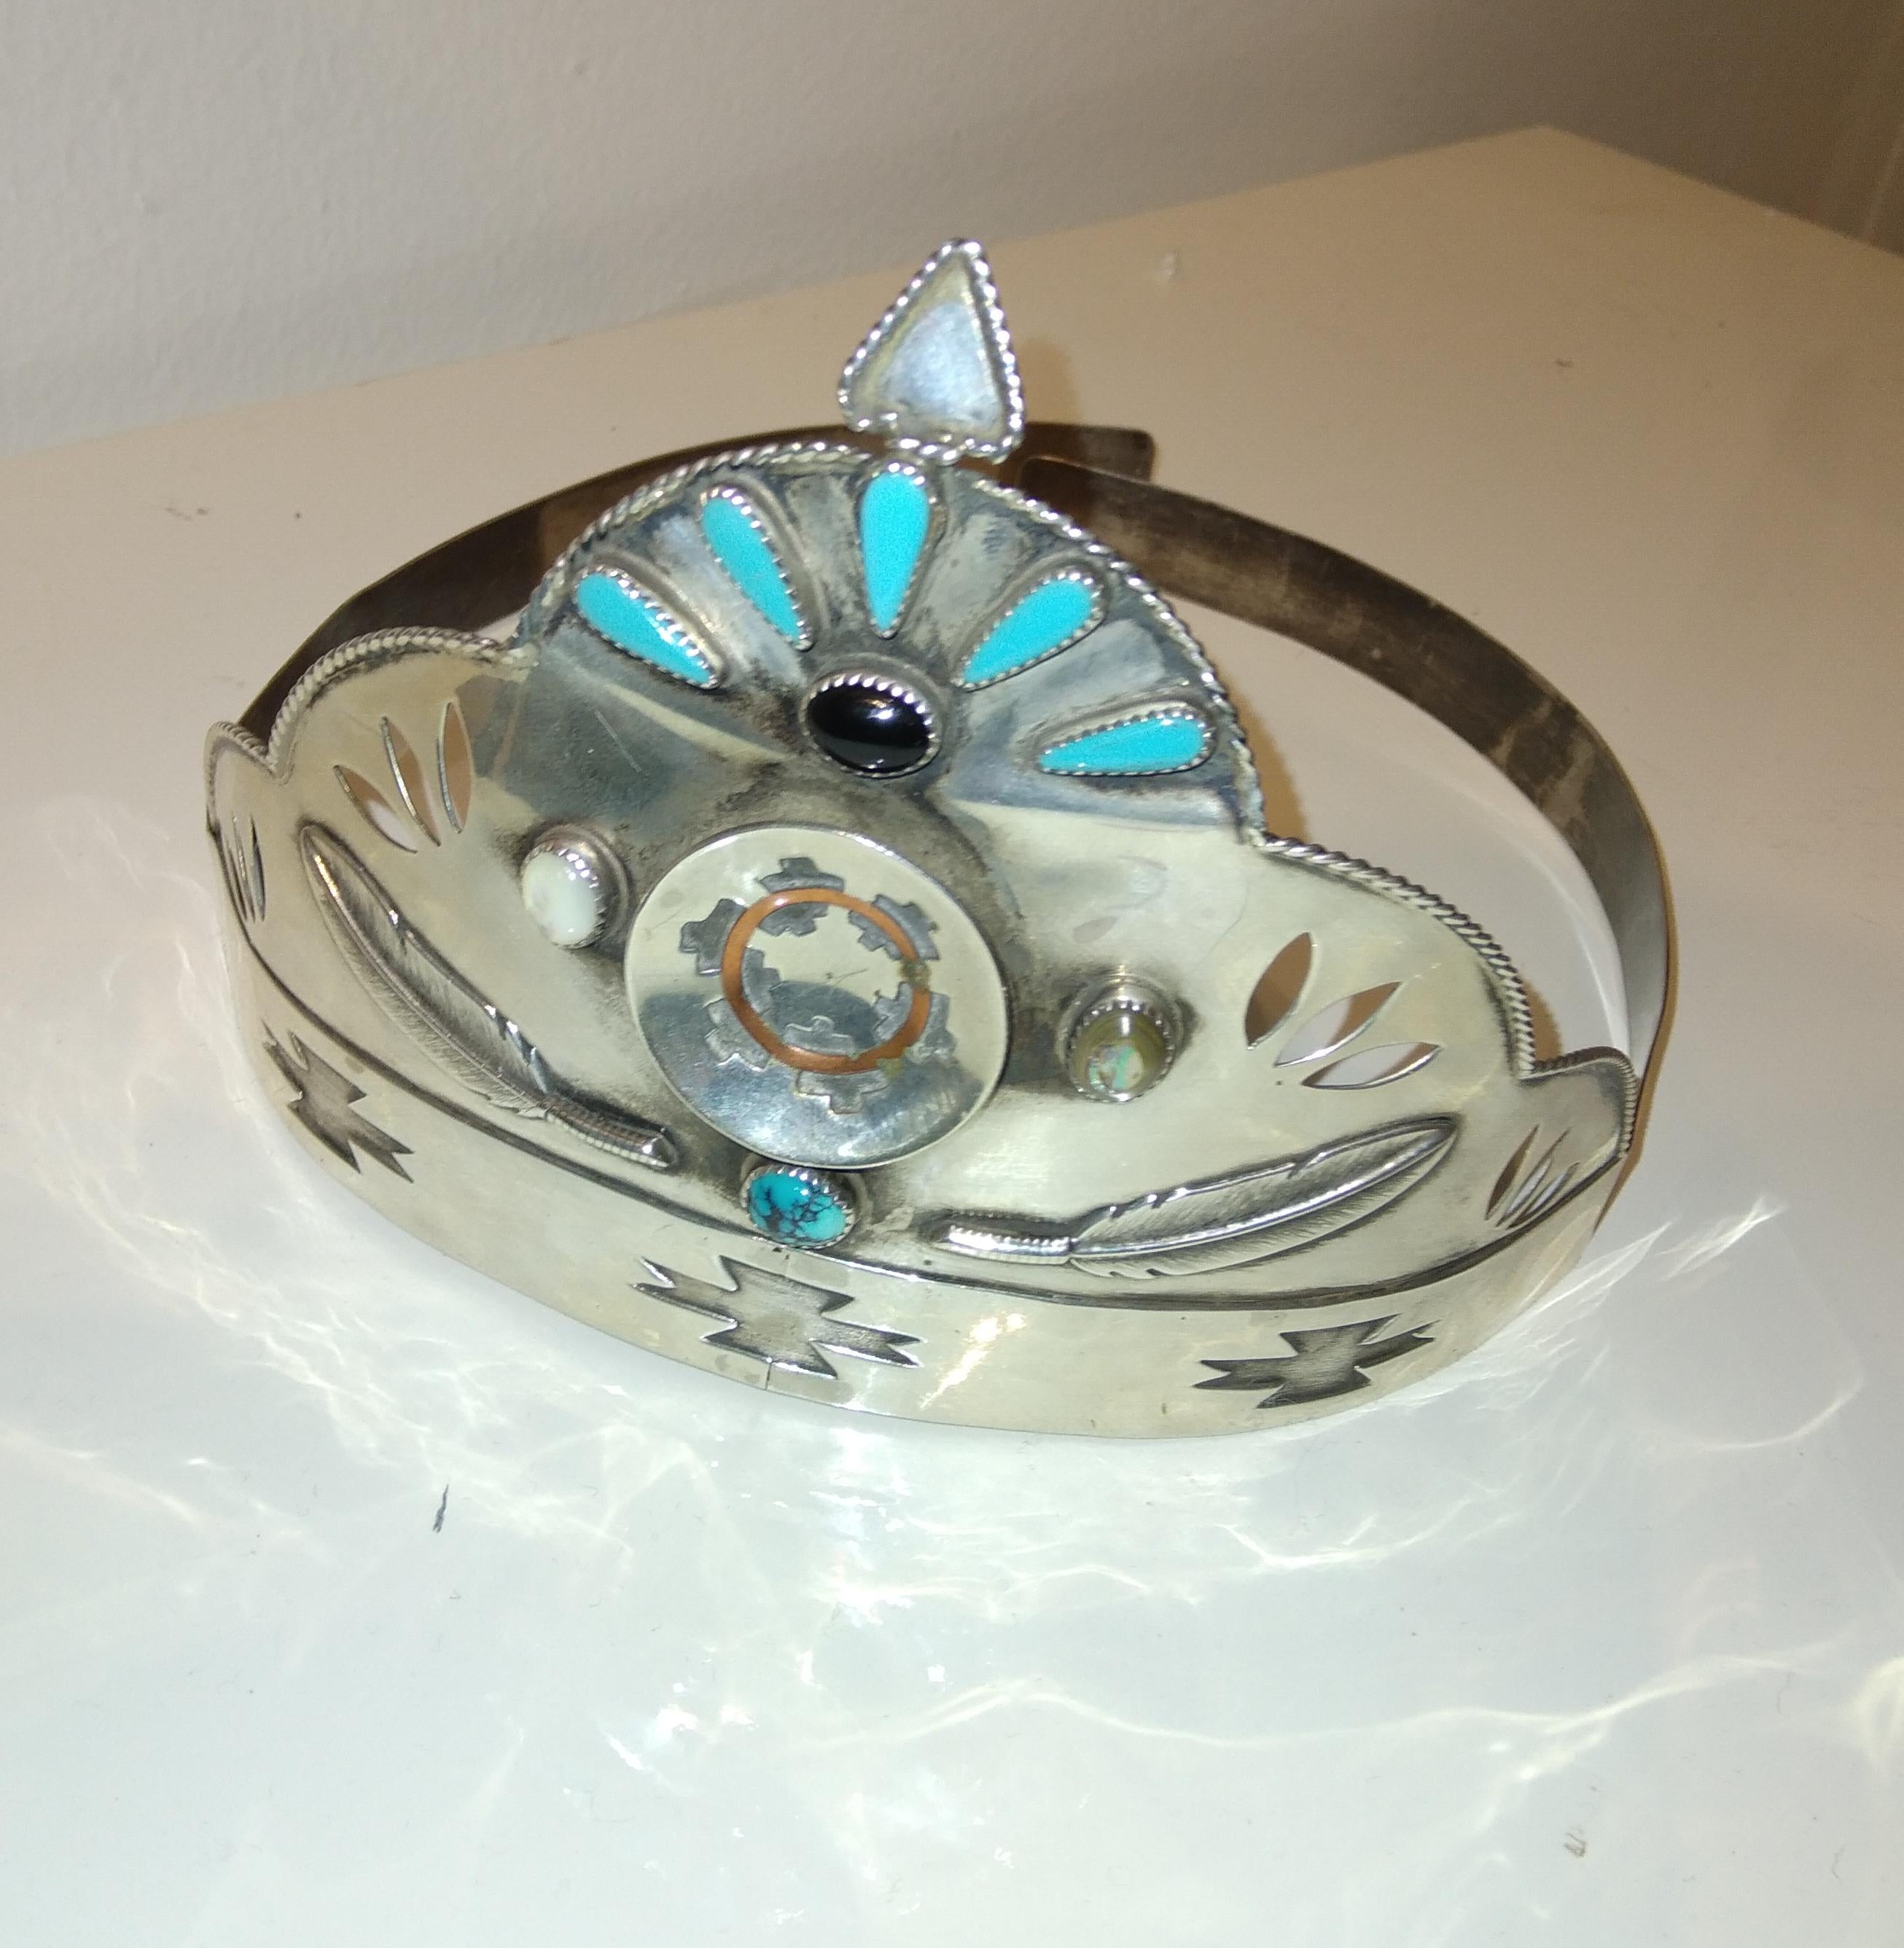 A fine silver Navajo silver and turquoise Crown or Tiara 

This type of Tiara is made for a beauty pageant held once a year in Arizona. The Tiara is presented to the winner . This particularly fine and beautifully made piece shows the full skills of